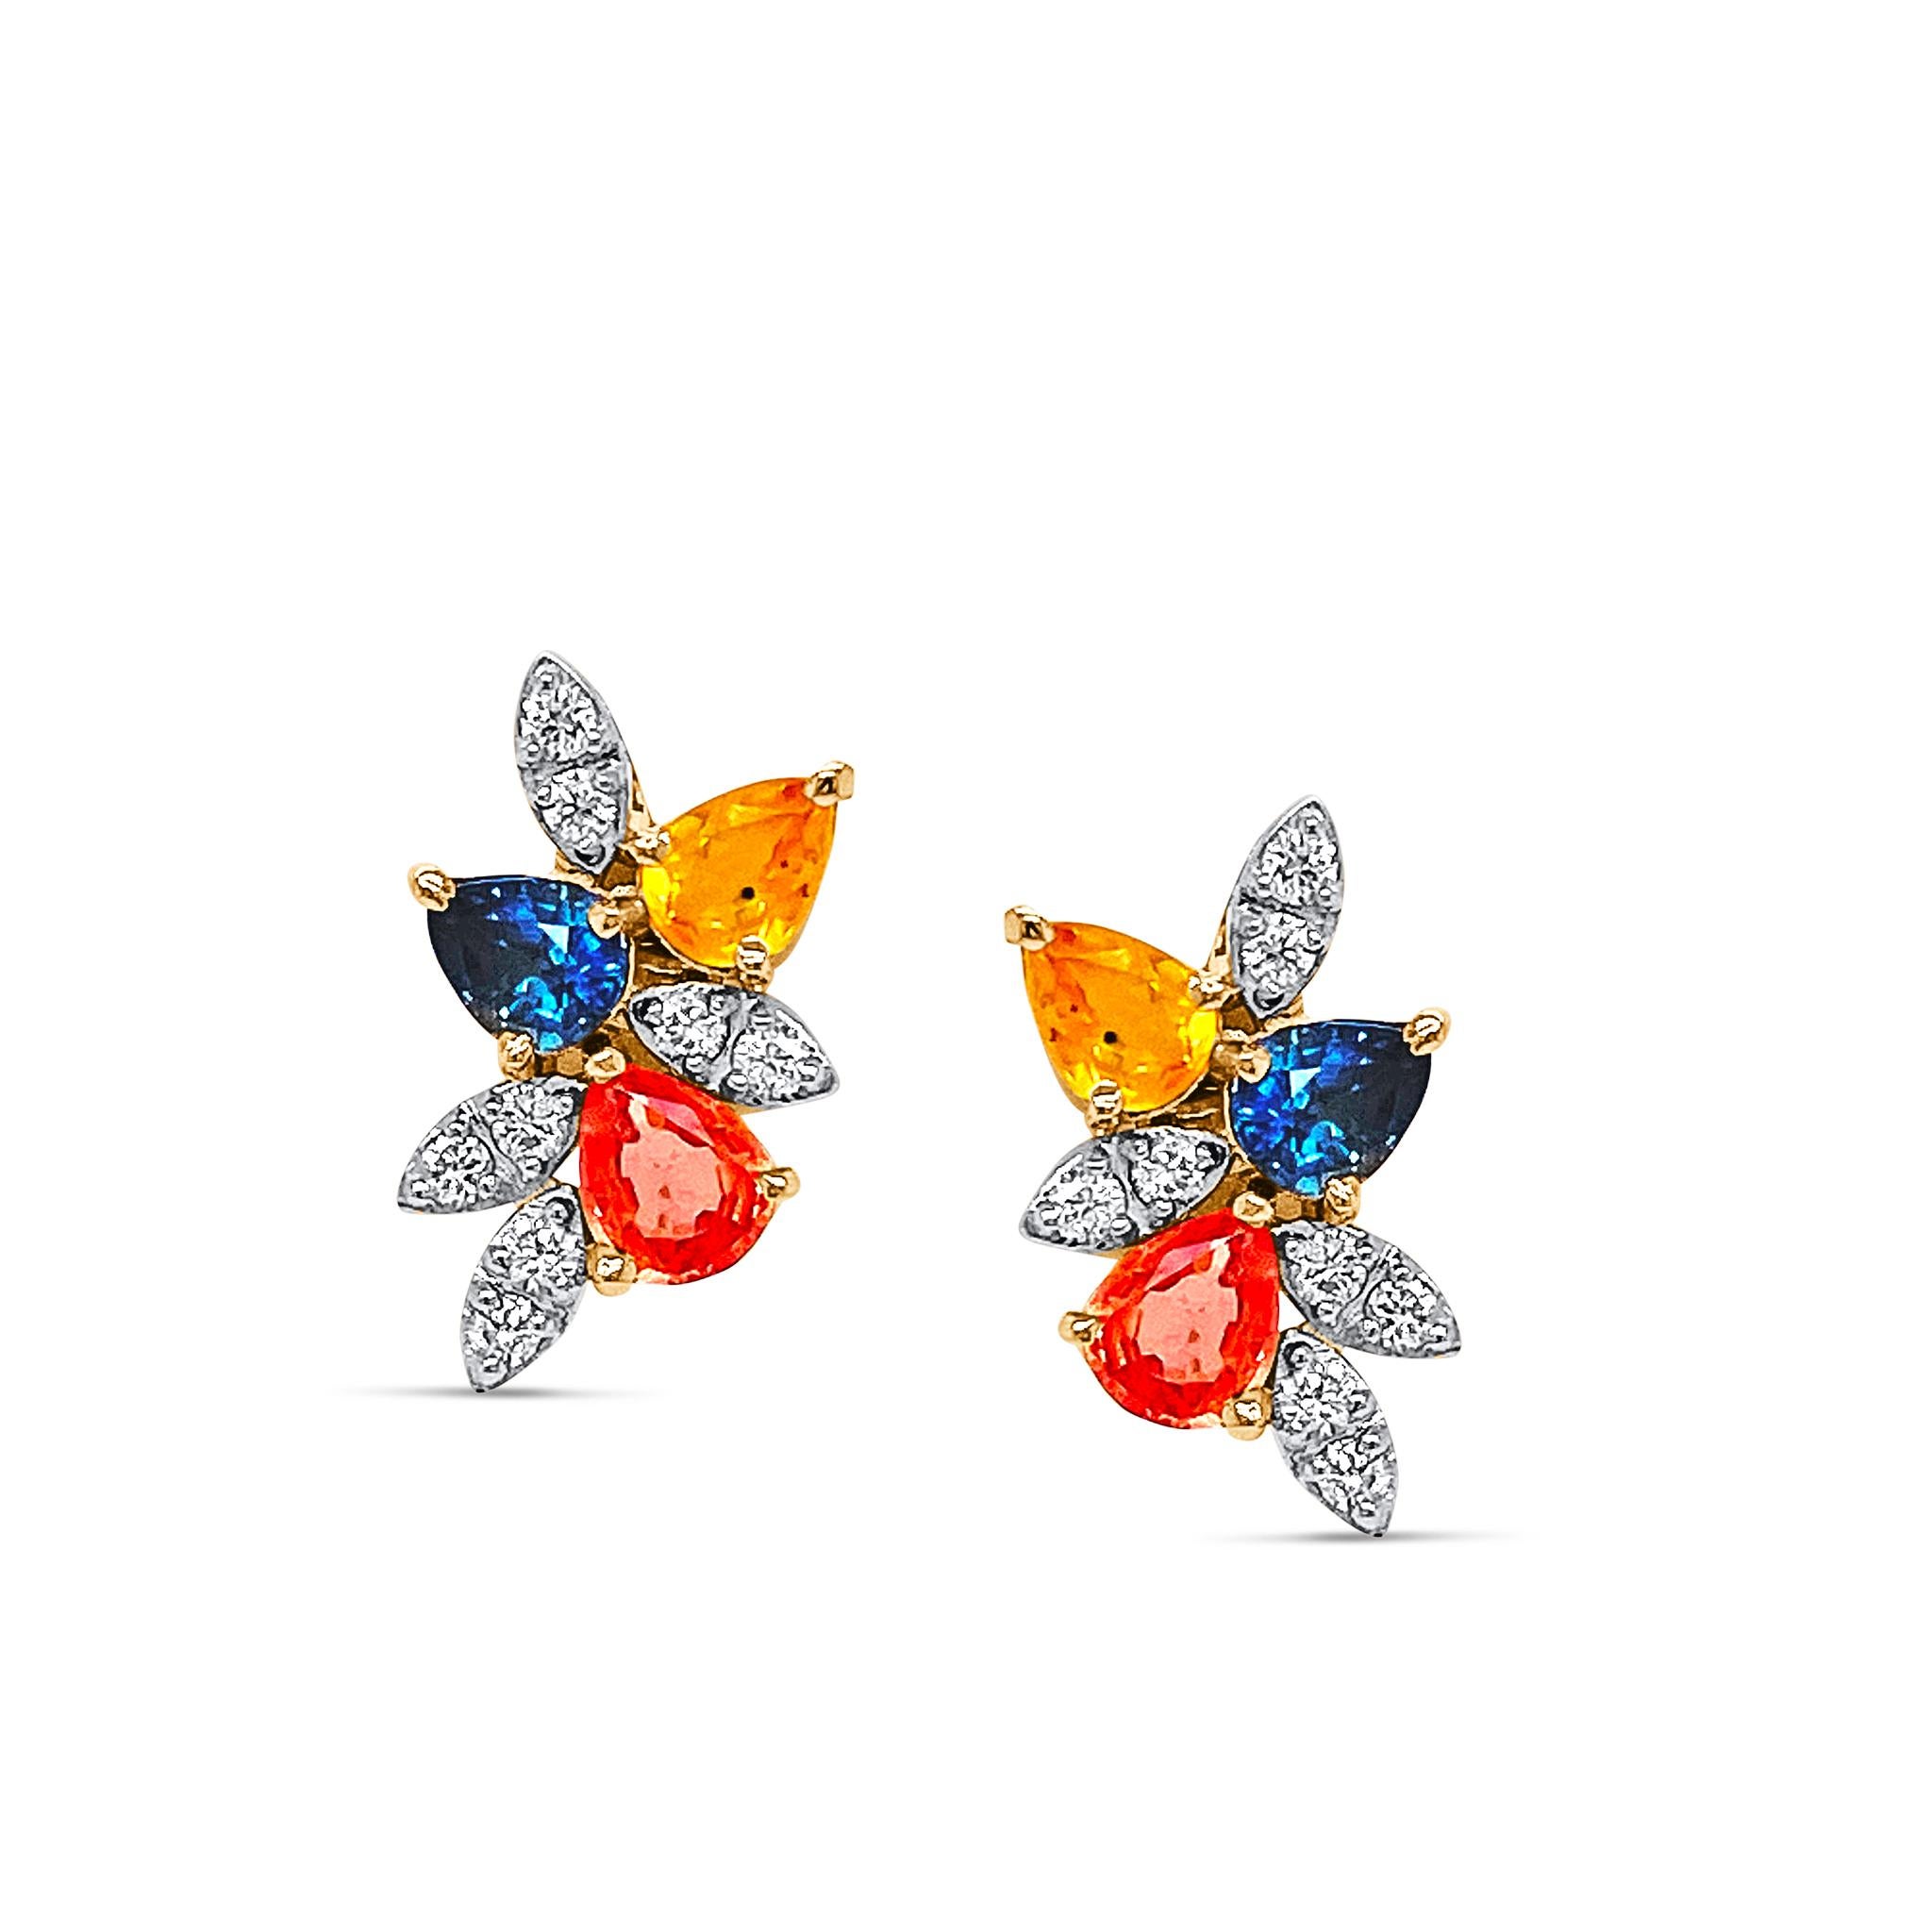 Tresor Beautiful Earring feature 1.65 carats of Gemstones and 0.23 carats of Diamond Weight. The Earring is an ode to the luxurious yet classic beauty with sparkly gemstones and feminine hues. Their contemporary and modern design make them perfect